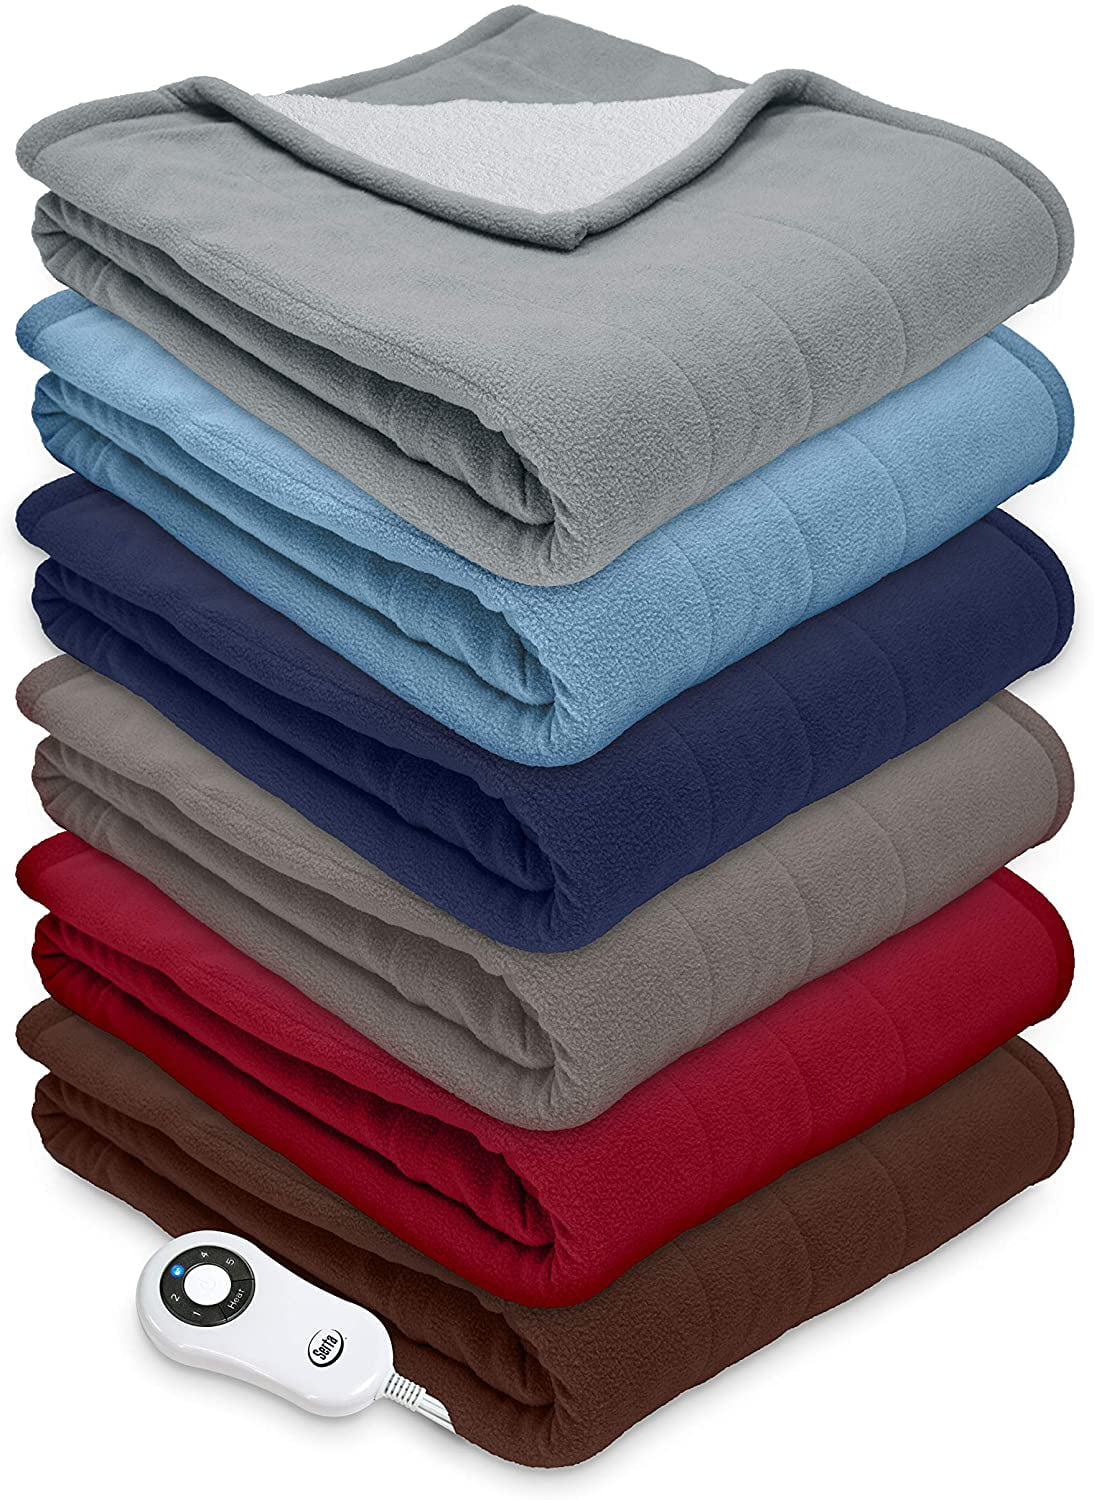 SertaReversible Sherpa/Fleece Heated Electric Throw Blanket 50"x60" With 5 S 